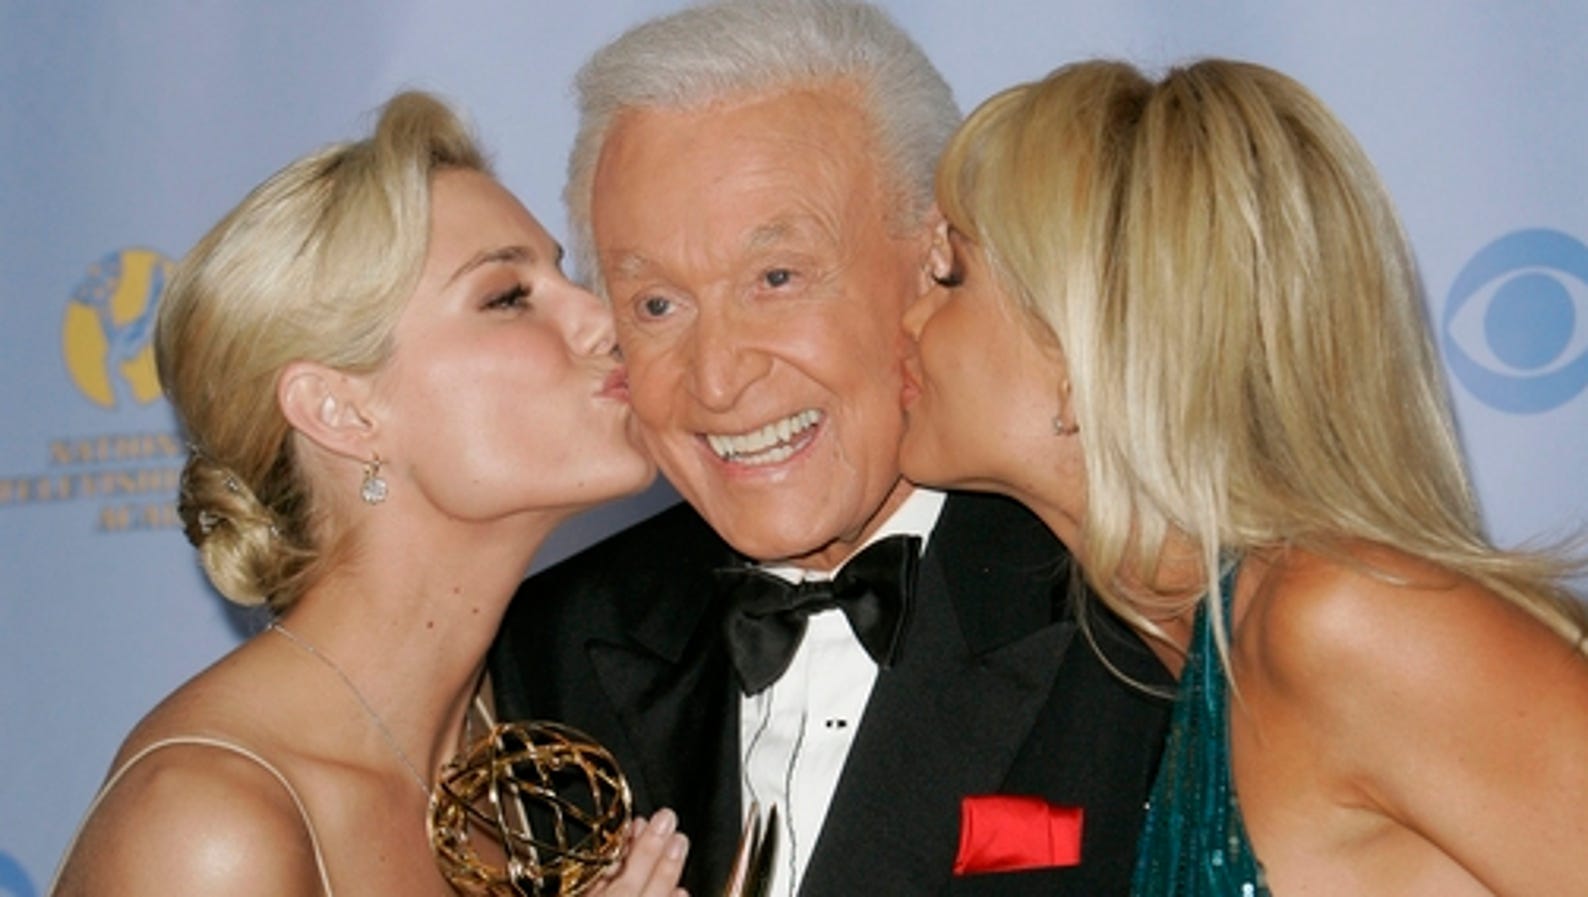 Bob Barker is kissed by the "Barker's Beauties" models as he poses with the award for outstanding game show host for his work on "The Price Is Right, at the 34th Annual Daytime Emmy Awards in Los Angeles on Friday.